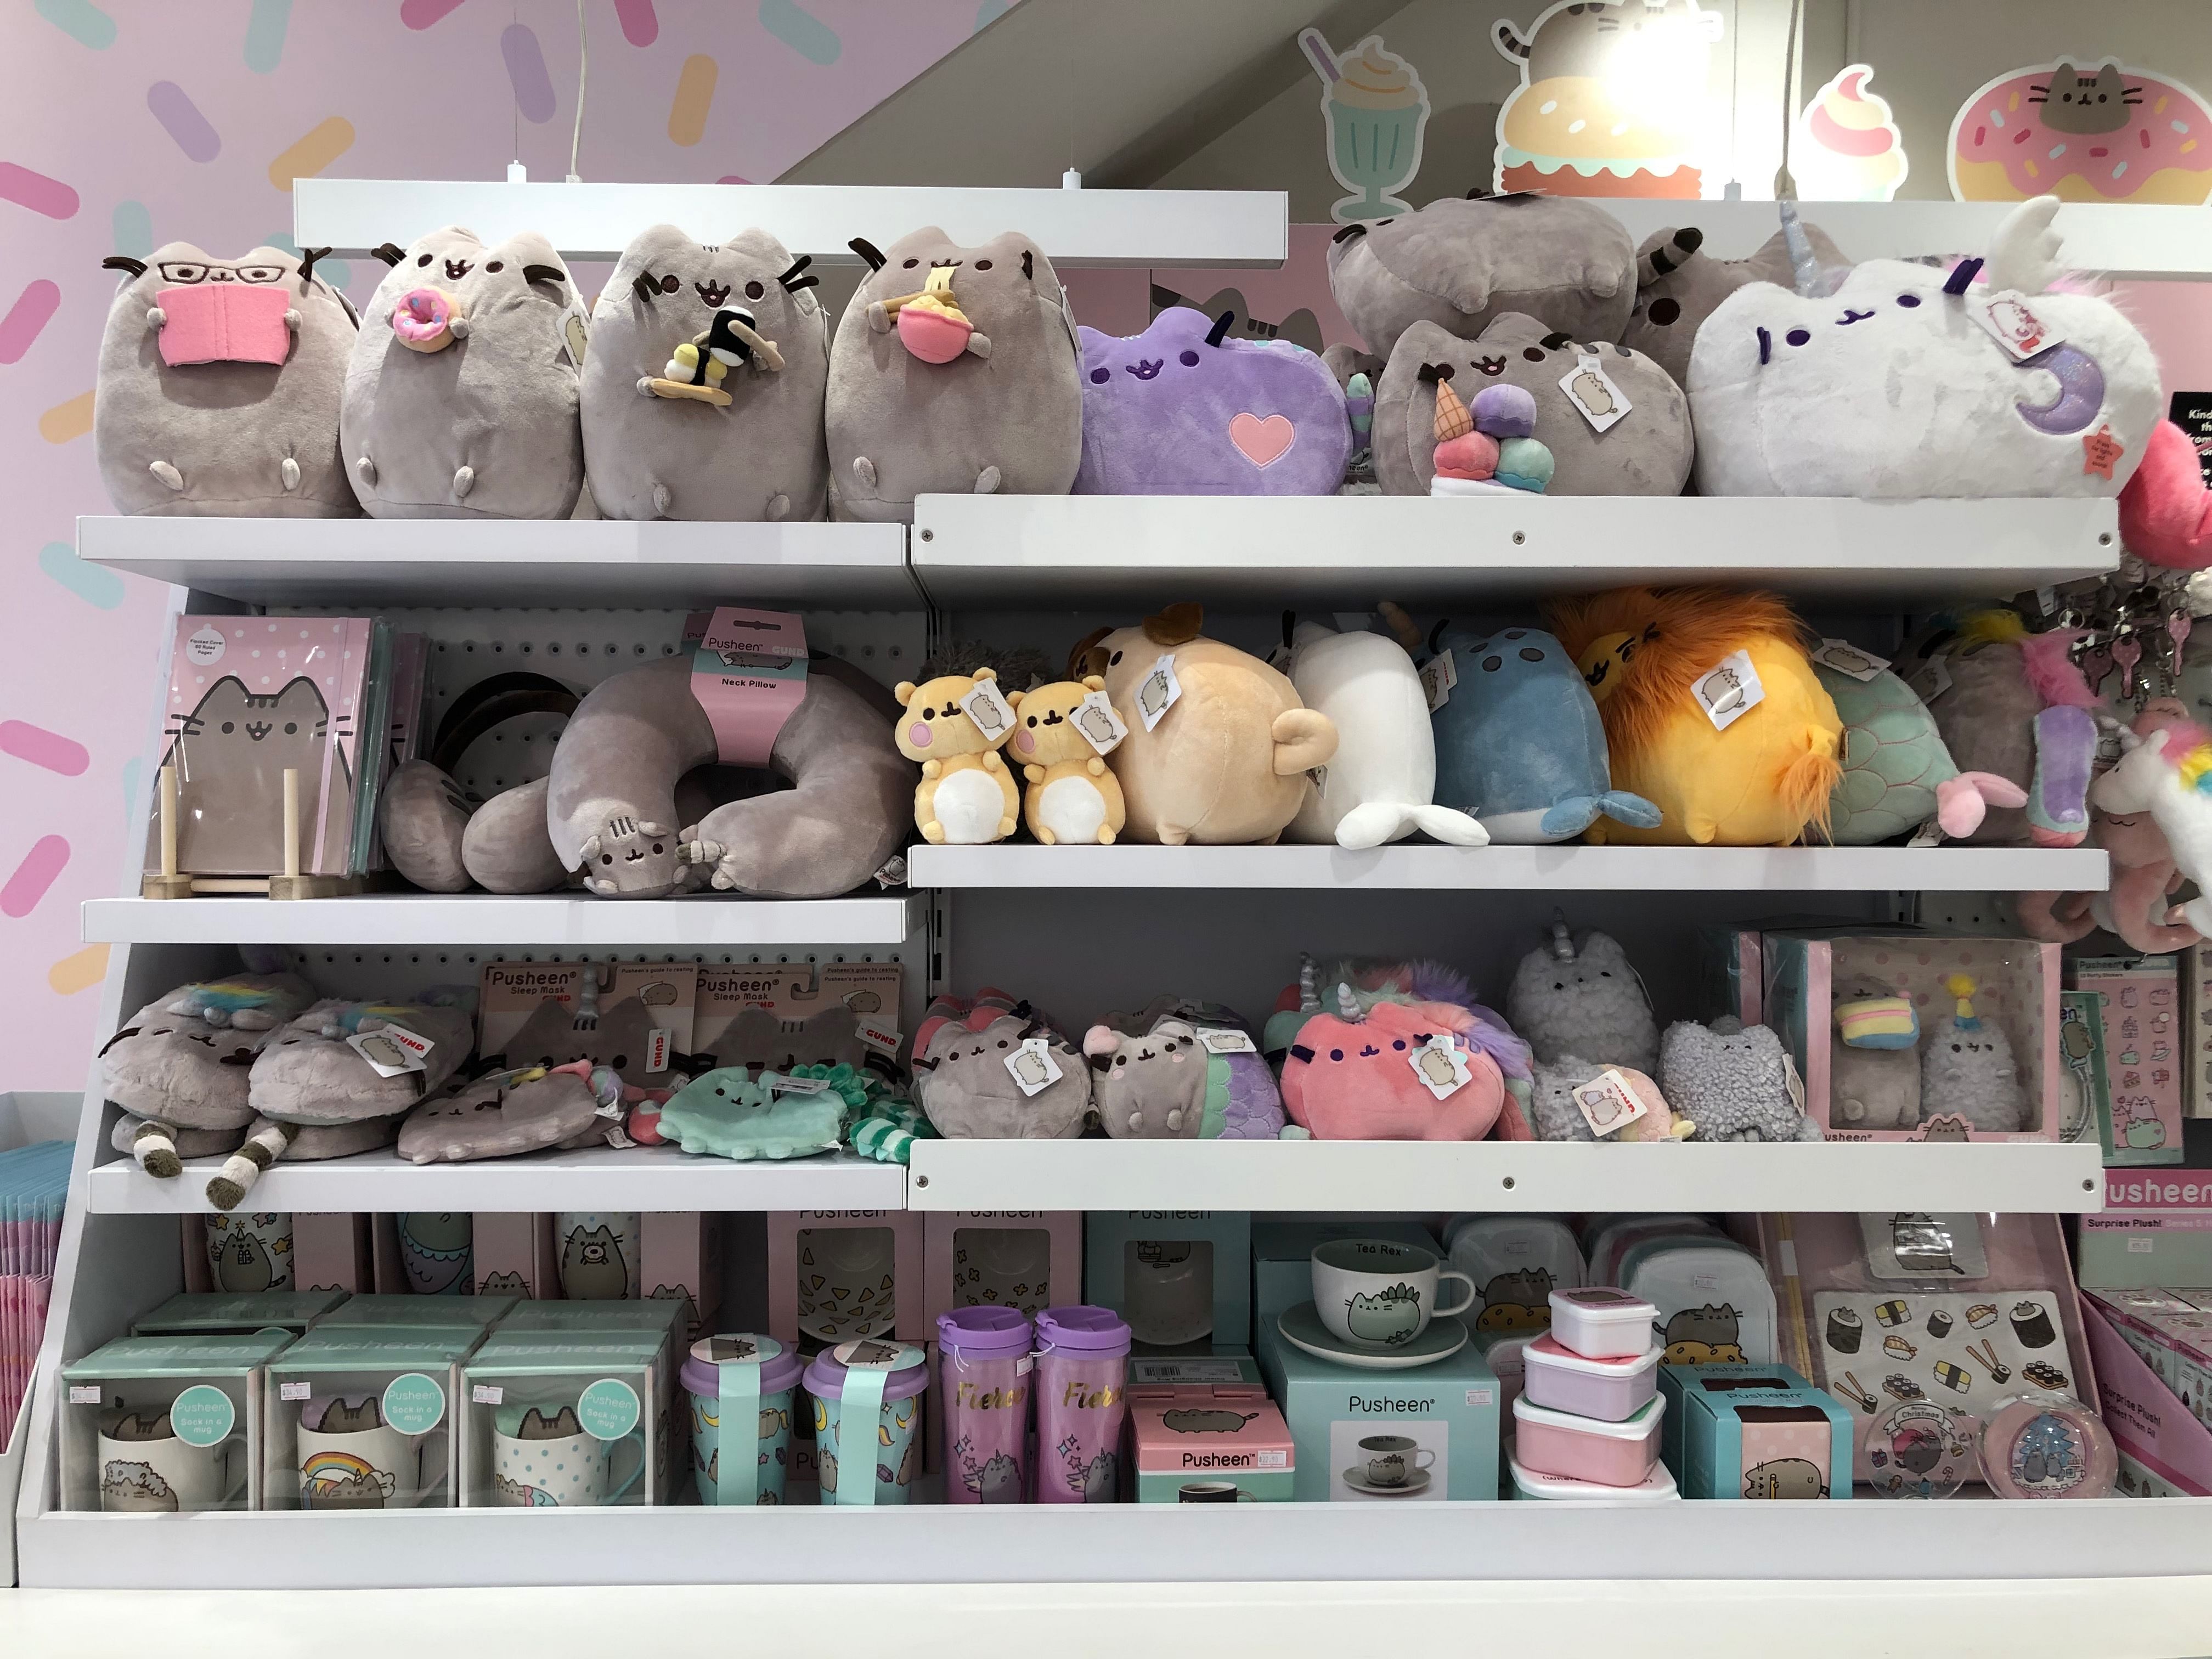 Pusheen cafe opens in Singapore: Here's why fans will love it - Home